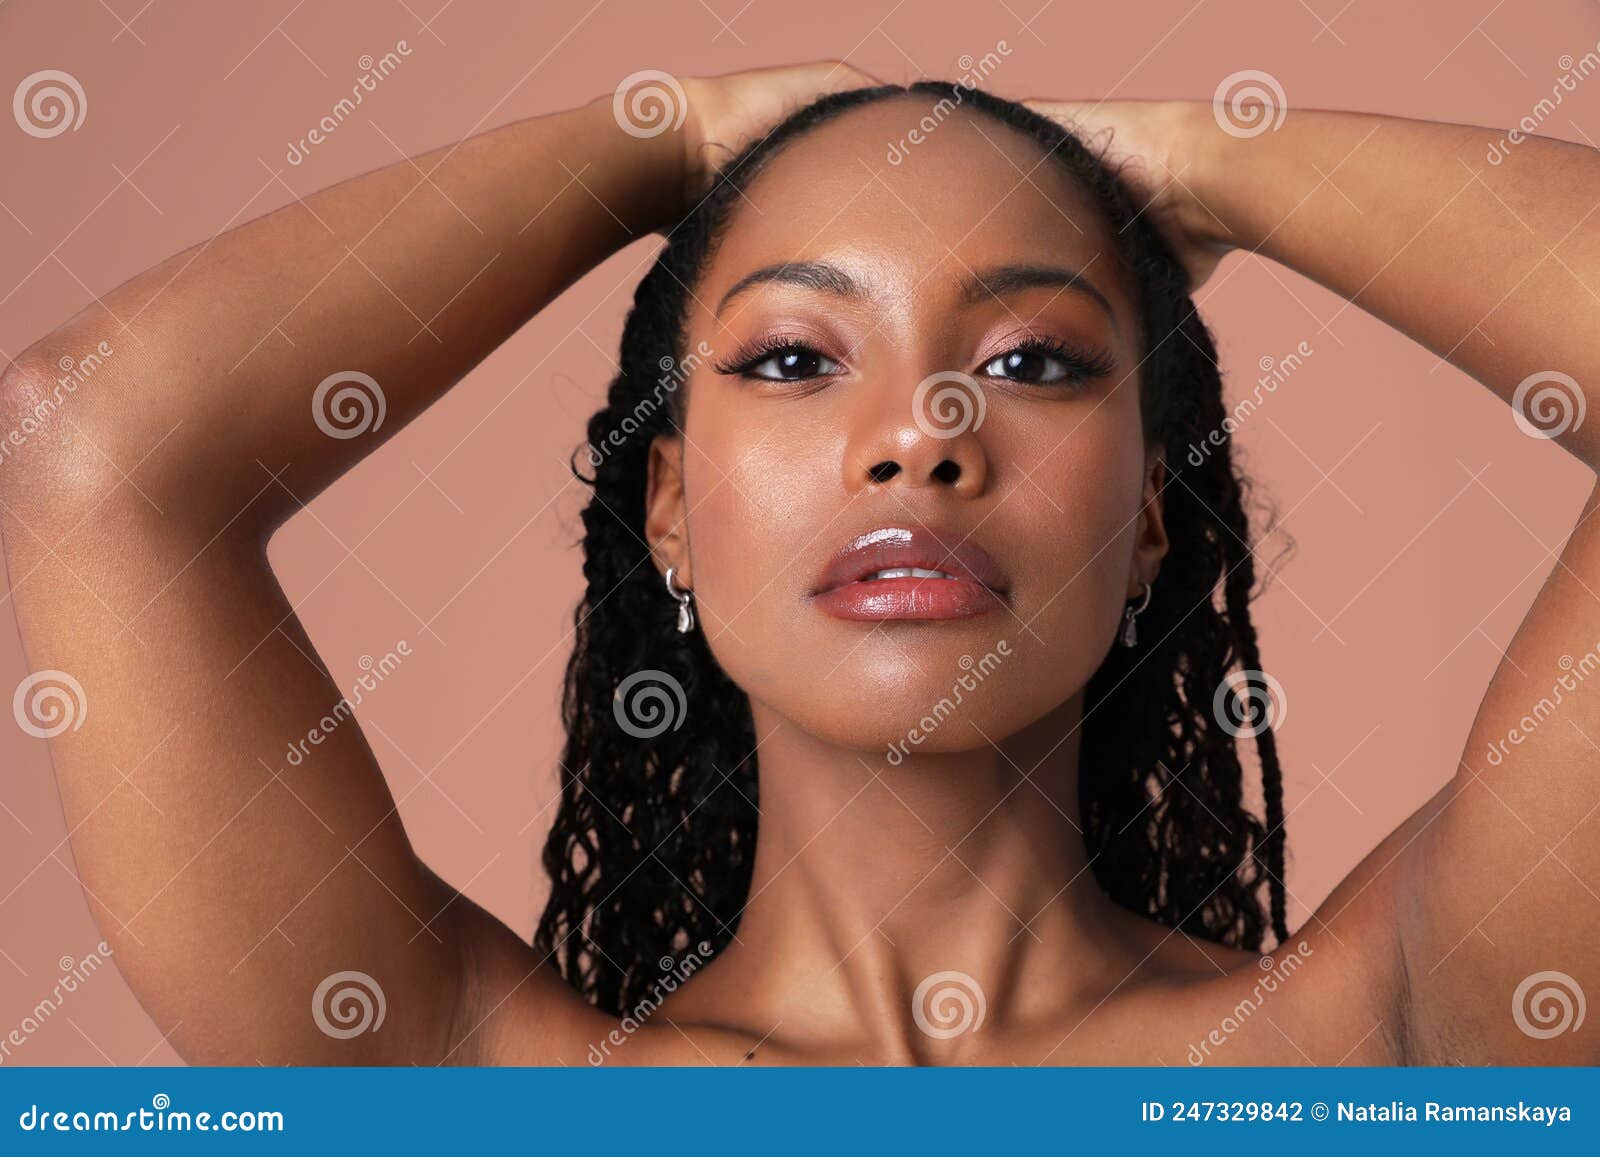 Close-up, headshot portrait of a model Laura Carrington as she poses...  News Photo - Getty Images